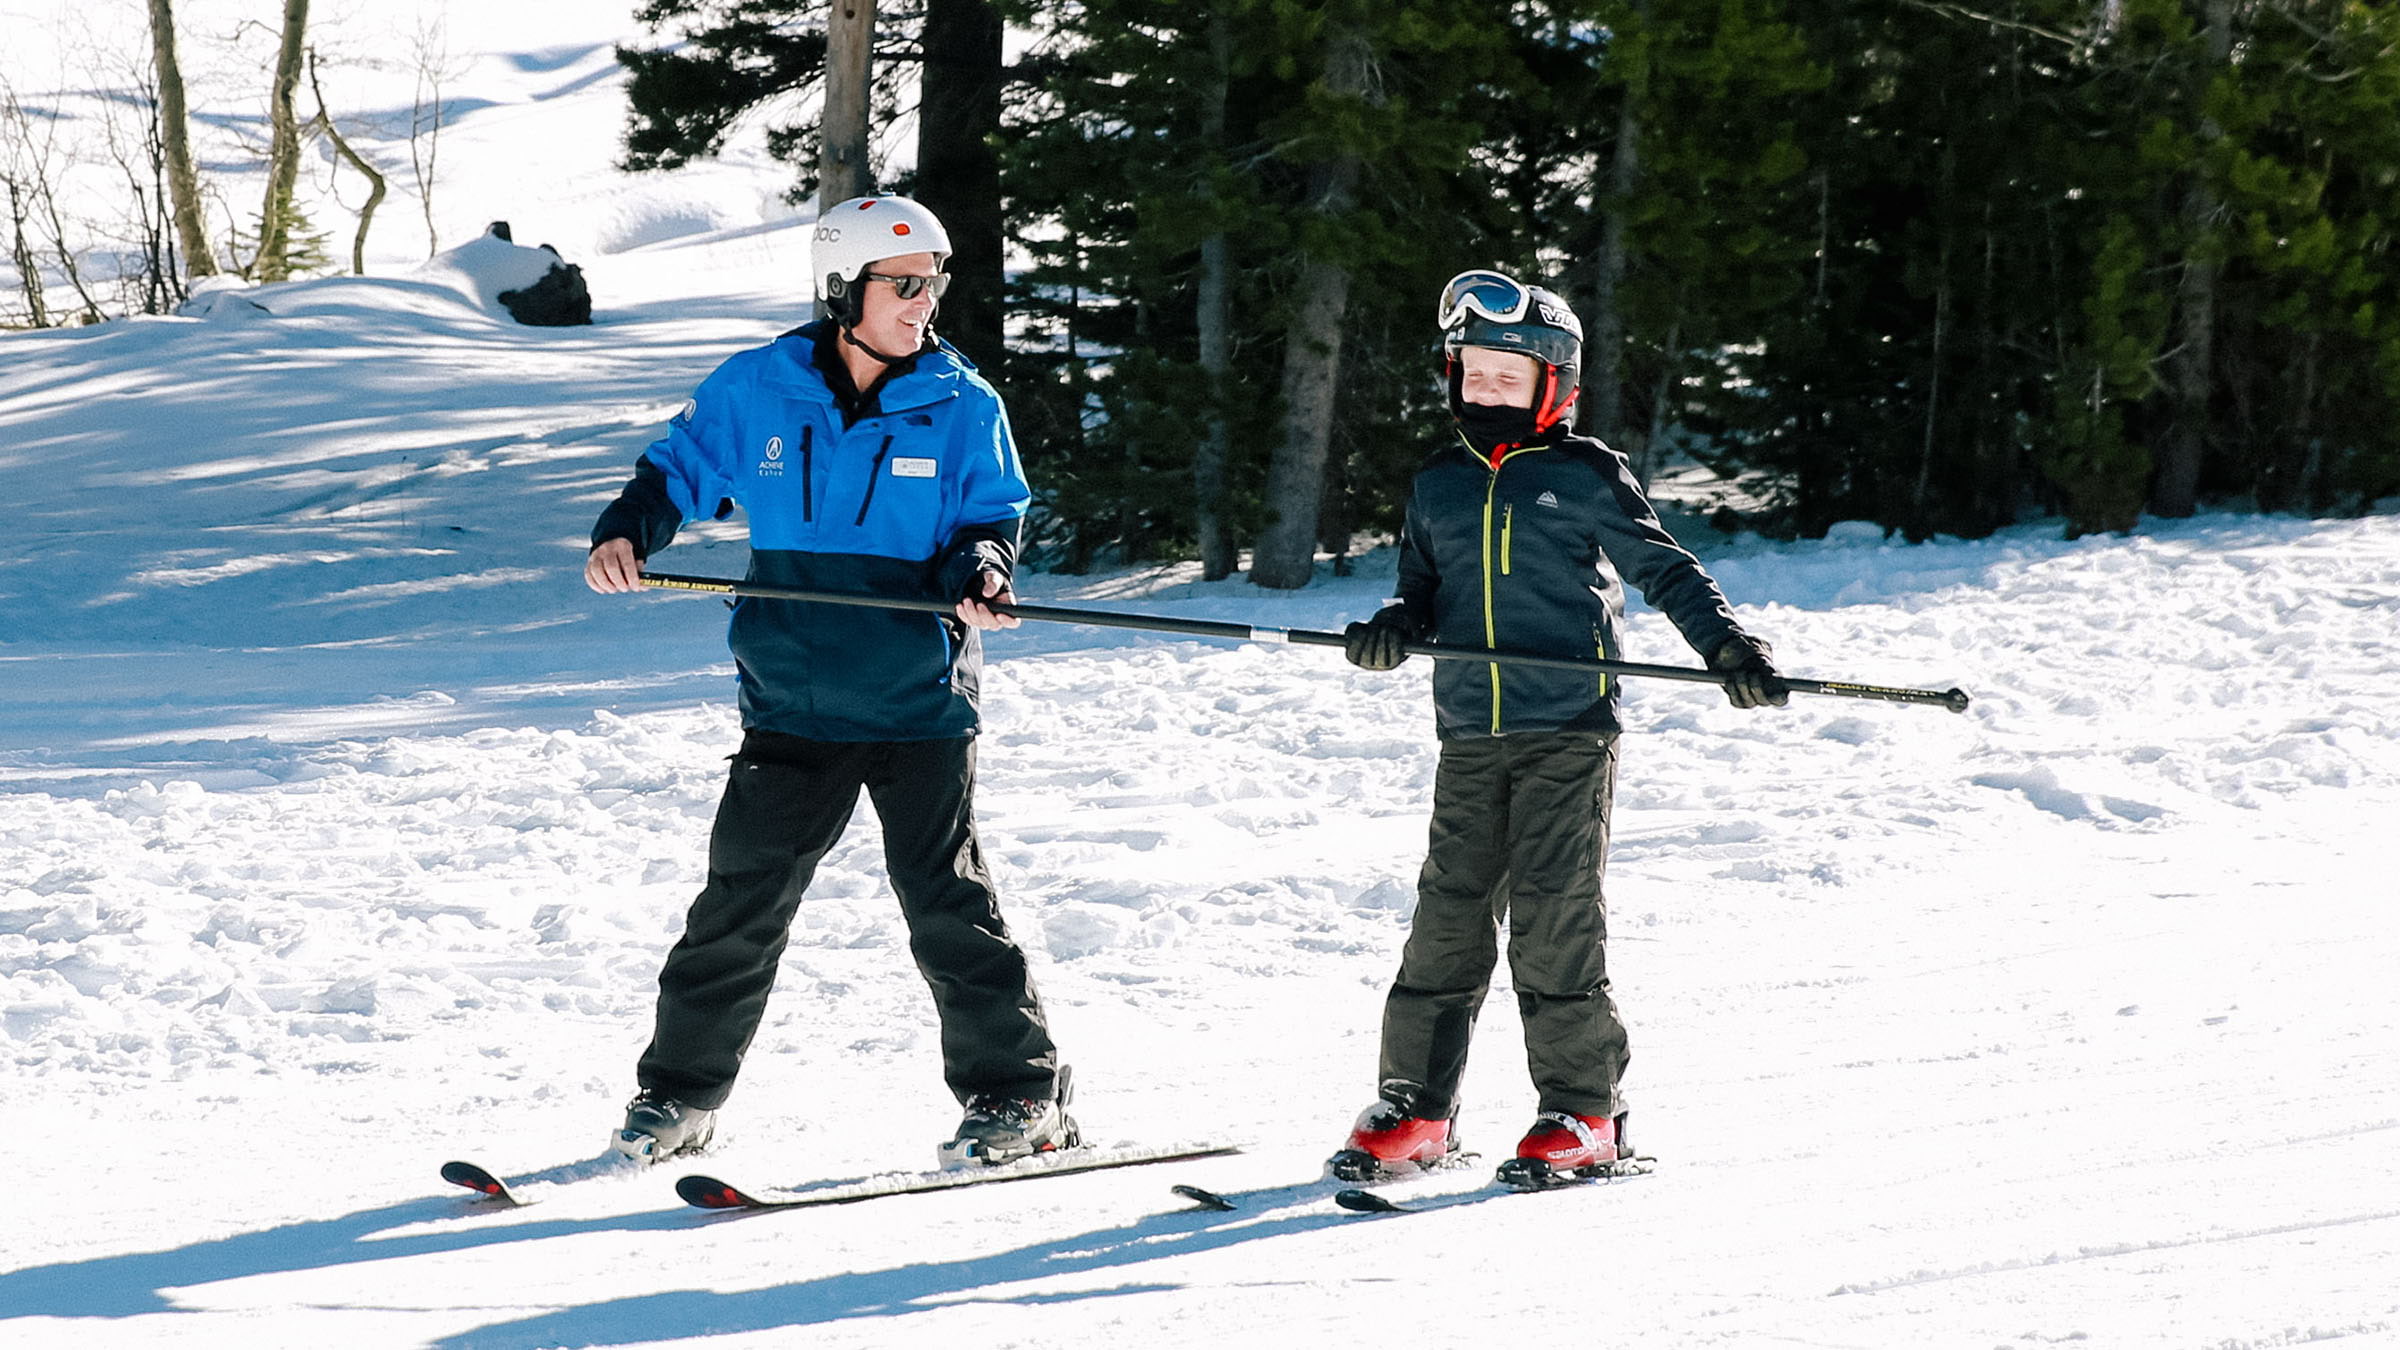 Achieve Tahoe adaptive ski school at Alpine Meadows makes skiing accessible to those with disabilities